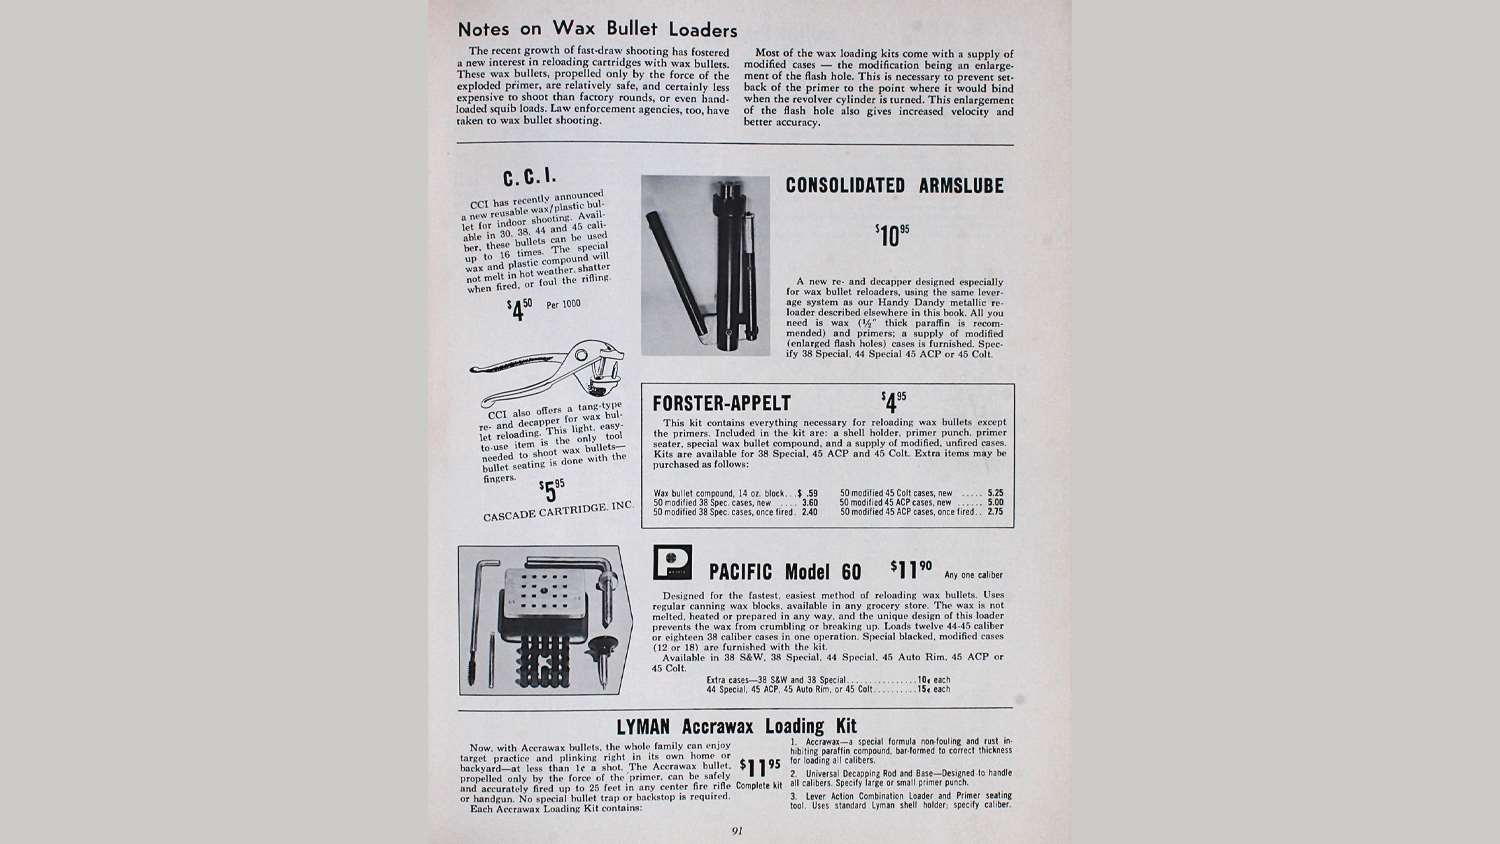 The first Handloader’s Digest of 1962 featured a full page of wax bullet accouterments.